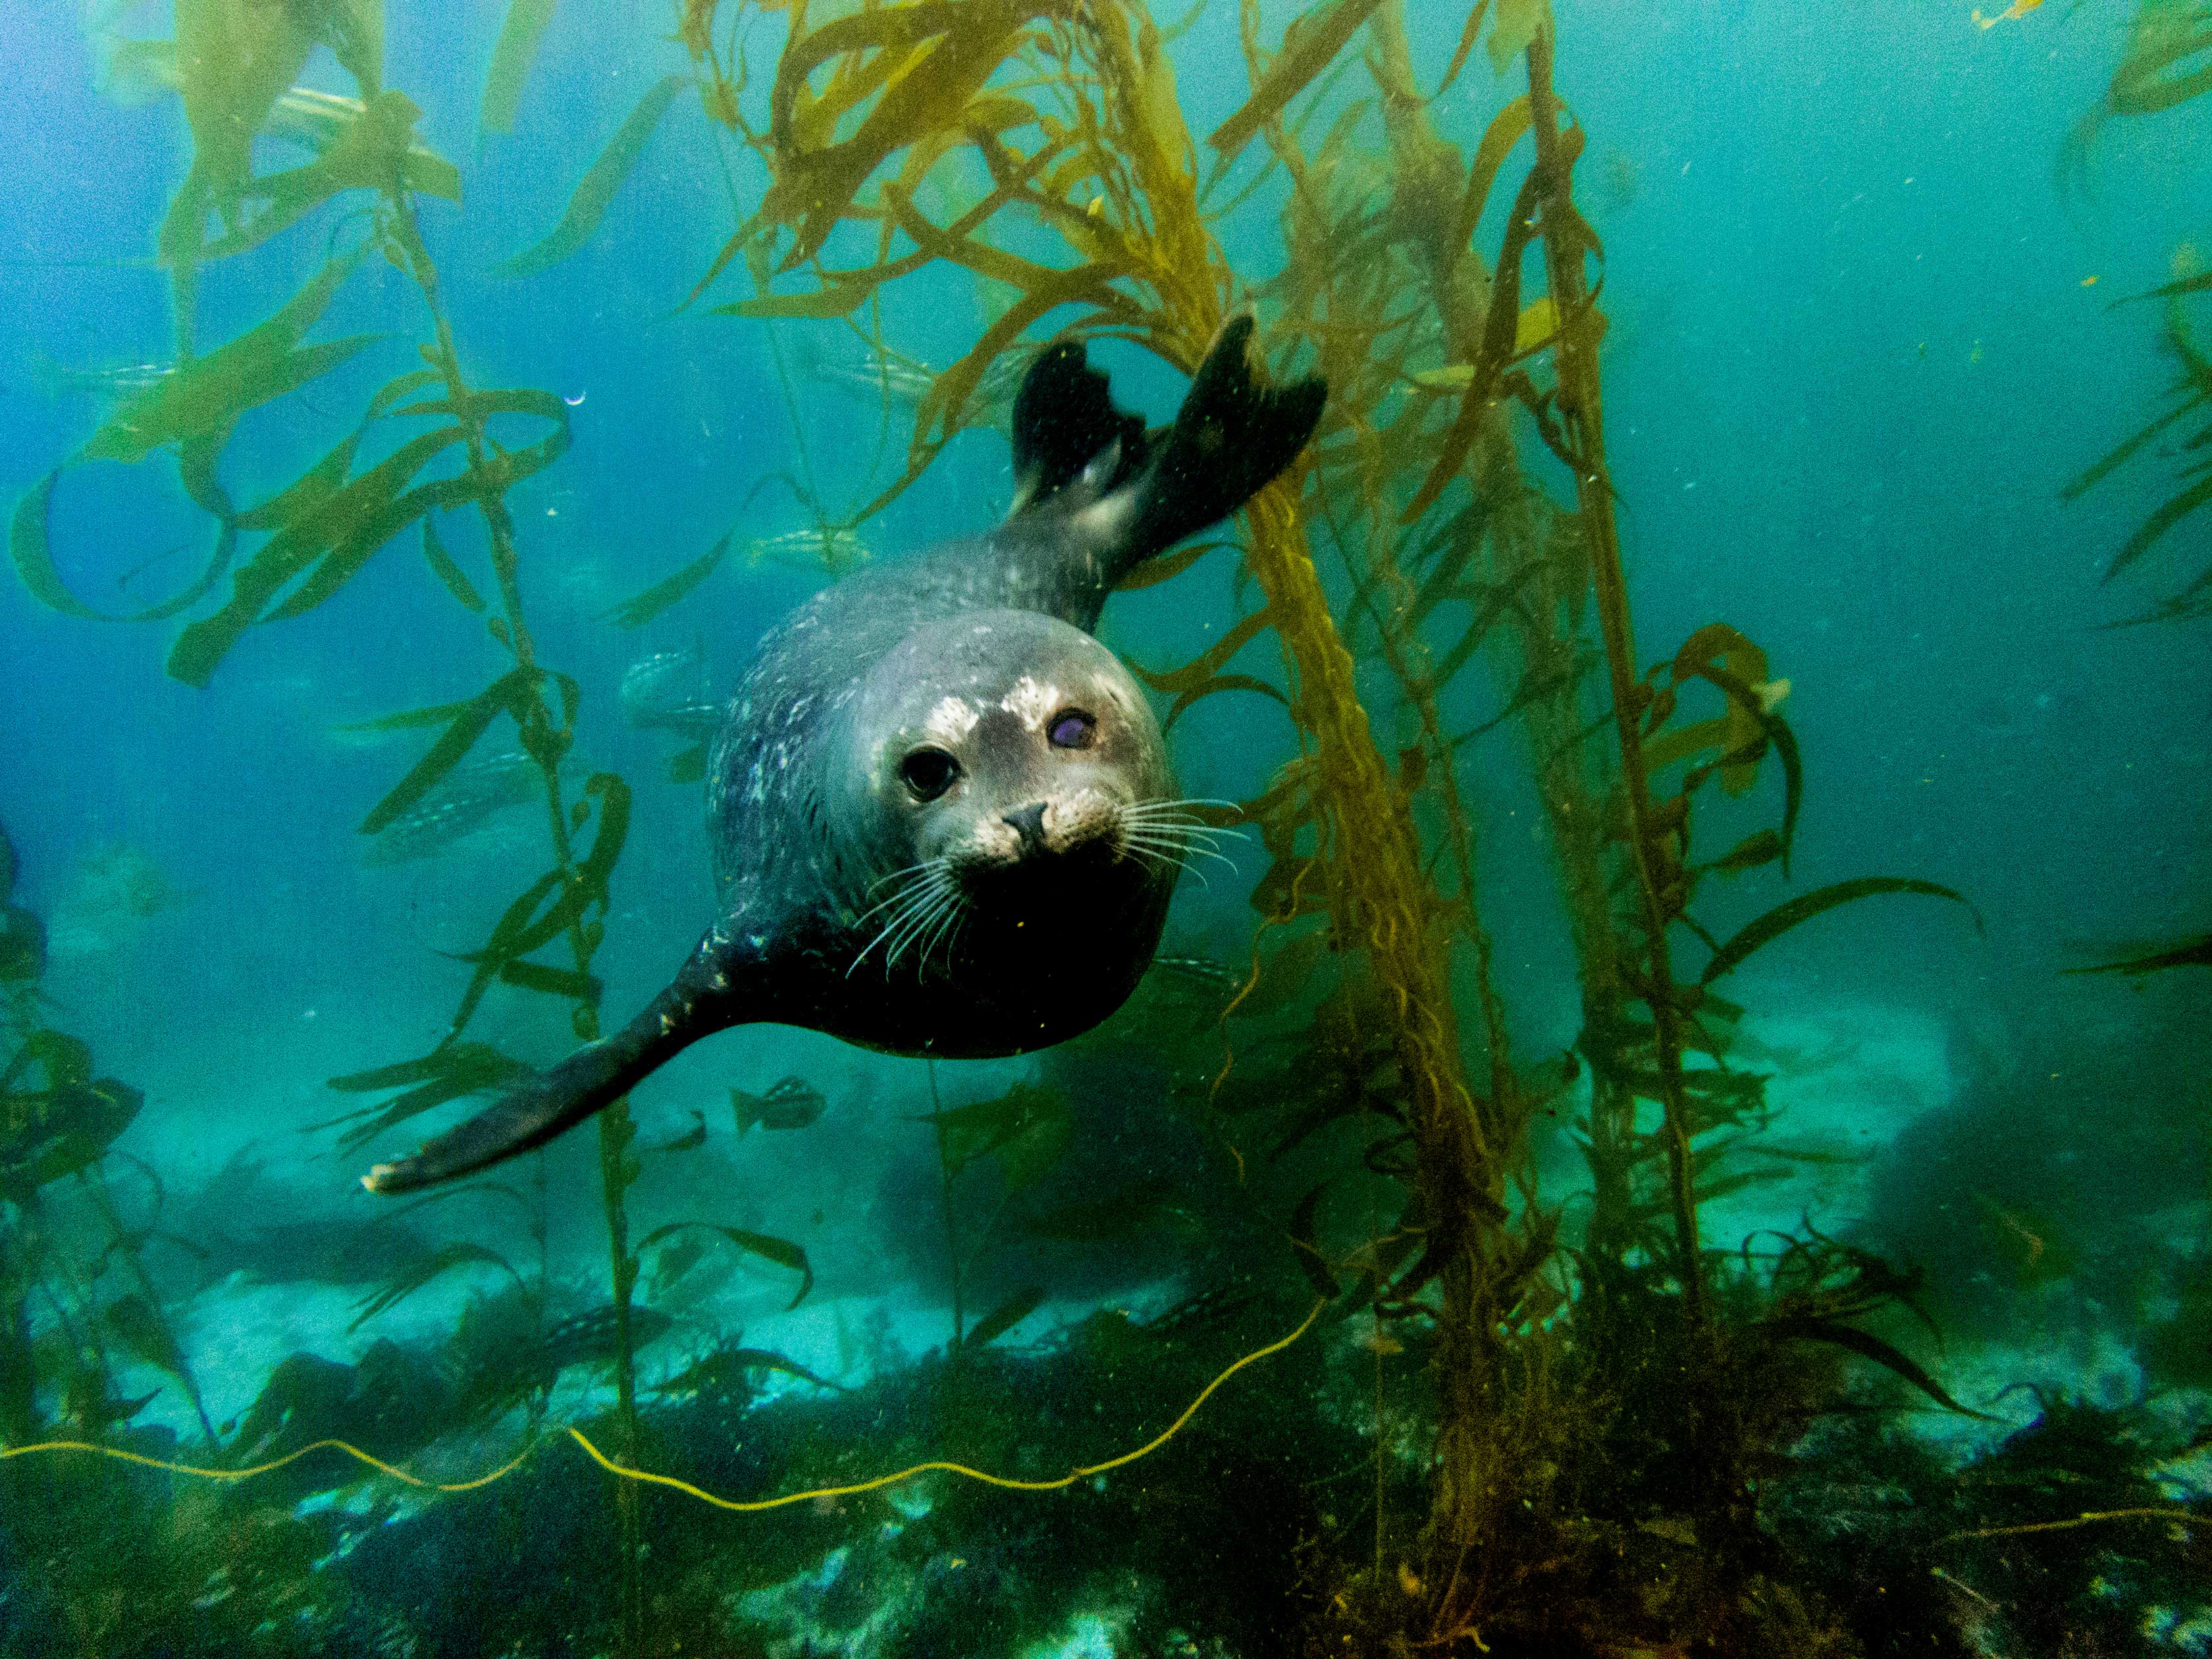 Seal looking directly at the camera while swimming in kelp forest